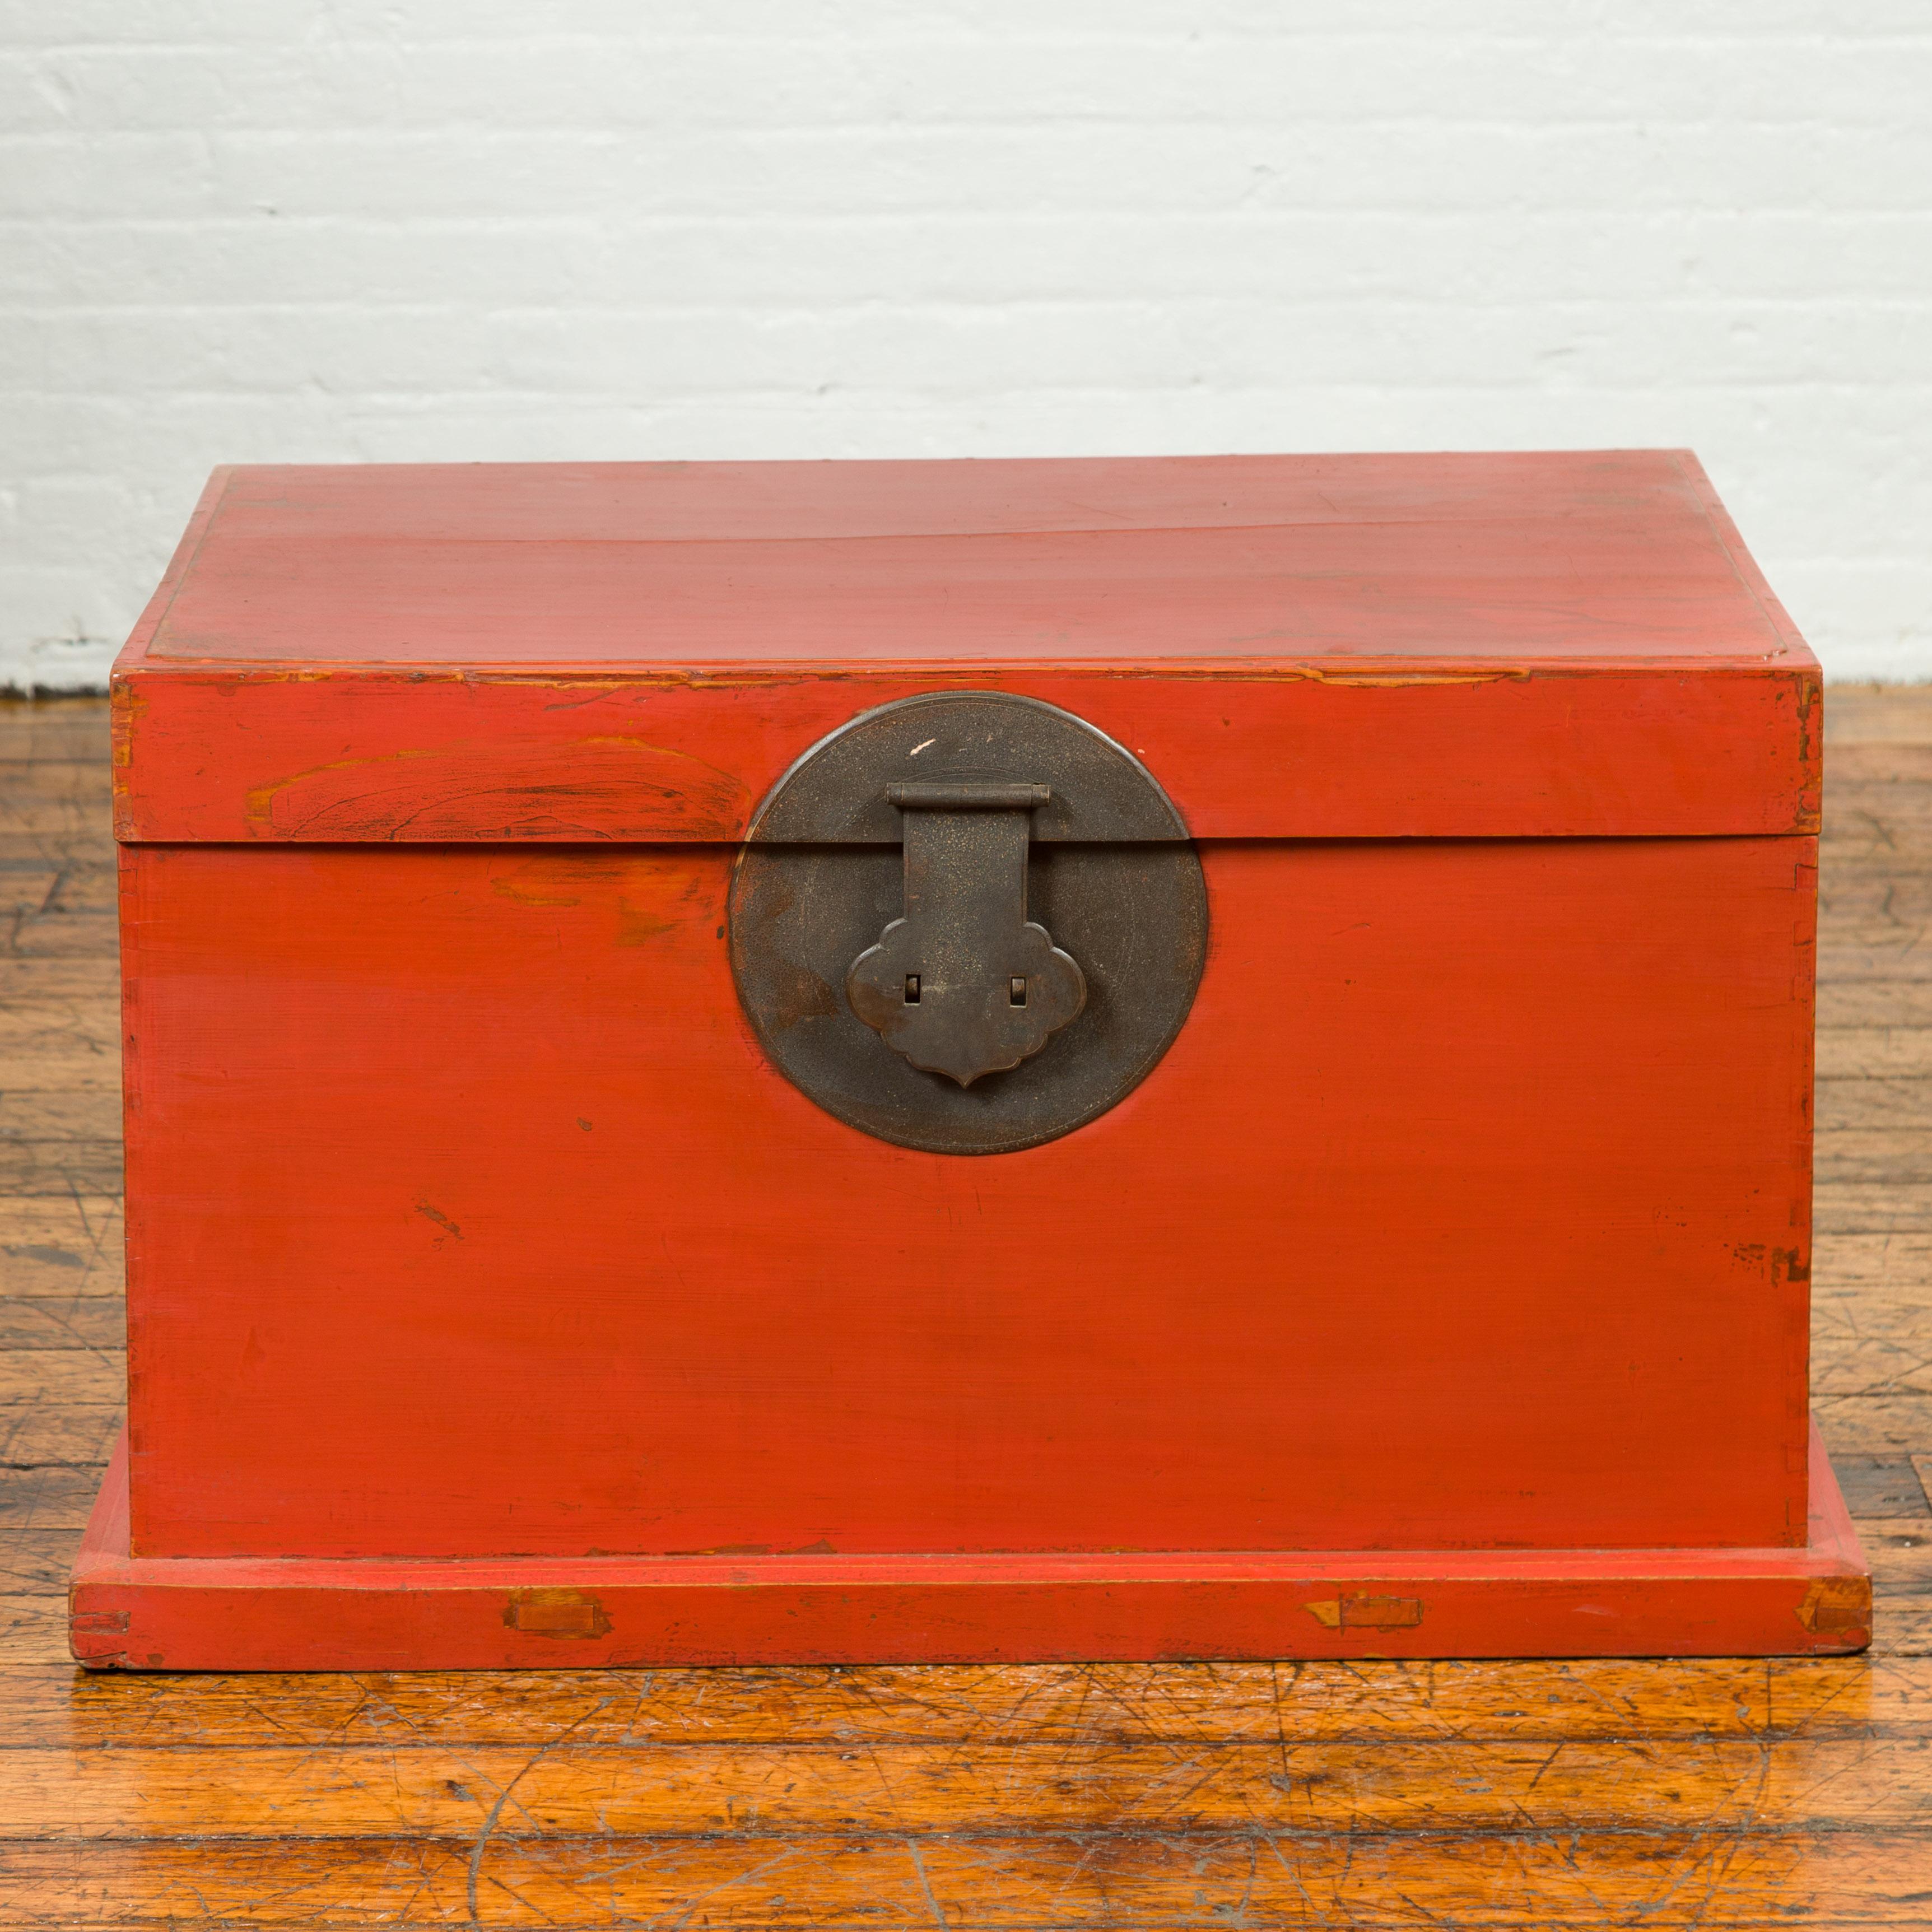 A Chinese Qing dynasty period red lacquered blanket chest from the 19th century, with iron hardware. This exquisite Chinese Qing dynasty period blanket chest, dating back to the 19th century, presents a captivating blend of functionality and